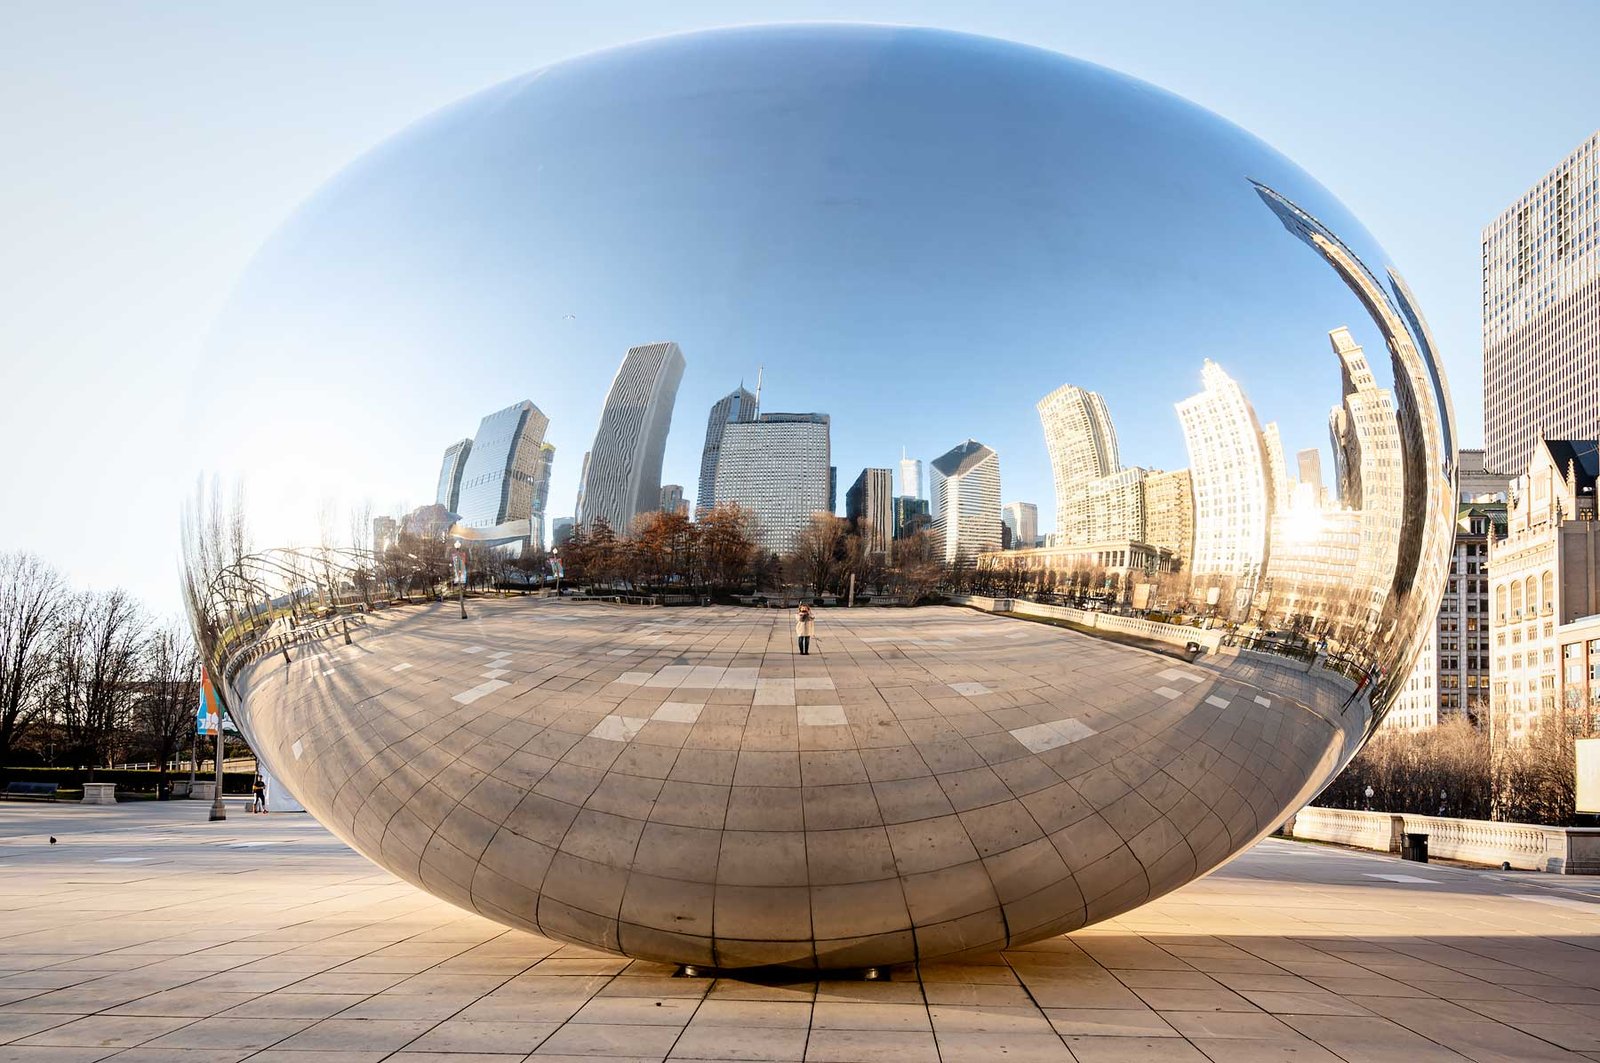 Cloud Gate - also known as The Bean by Anish Kapoor in Millennium Park, Chicago. The 15 Best Things to Do and See in Chicago